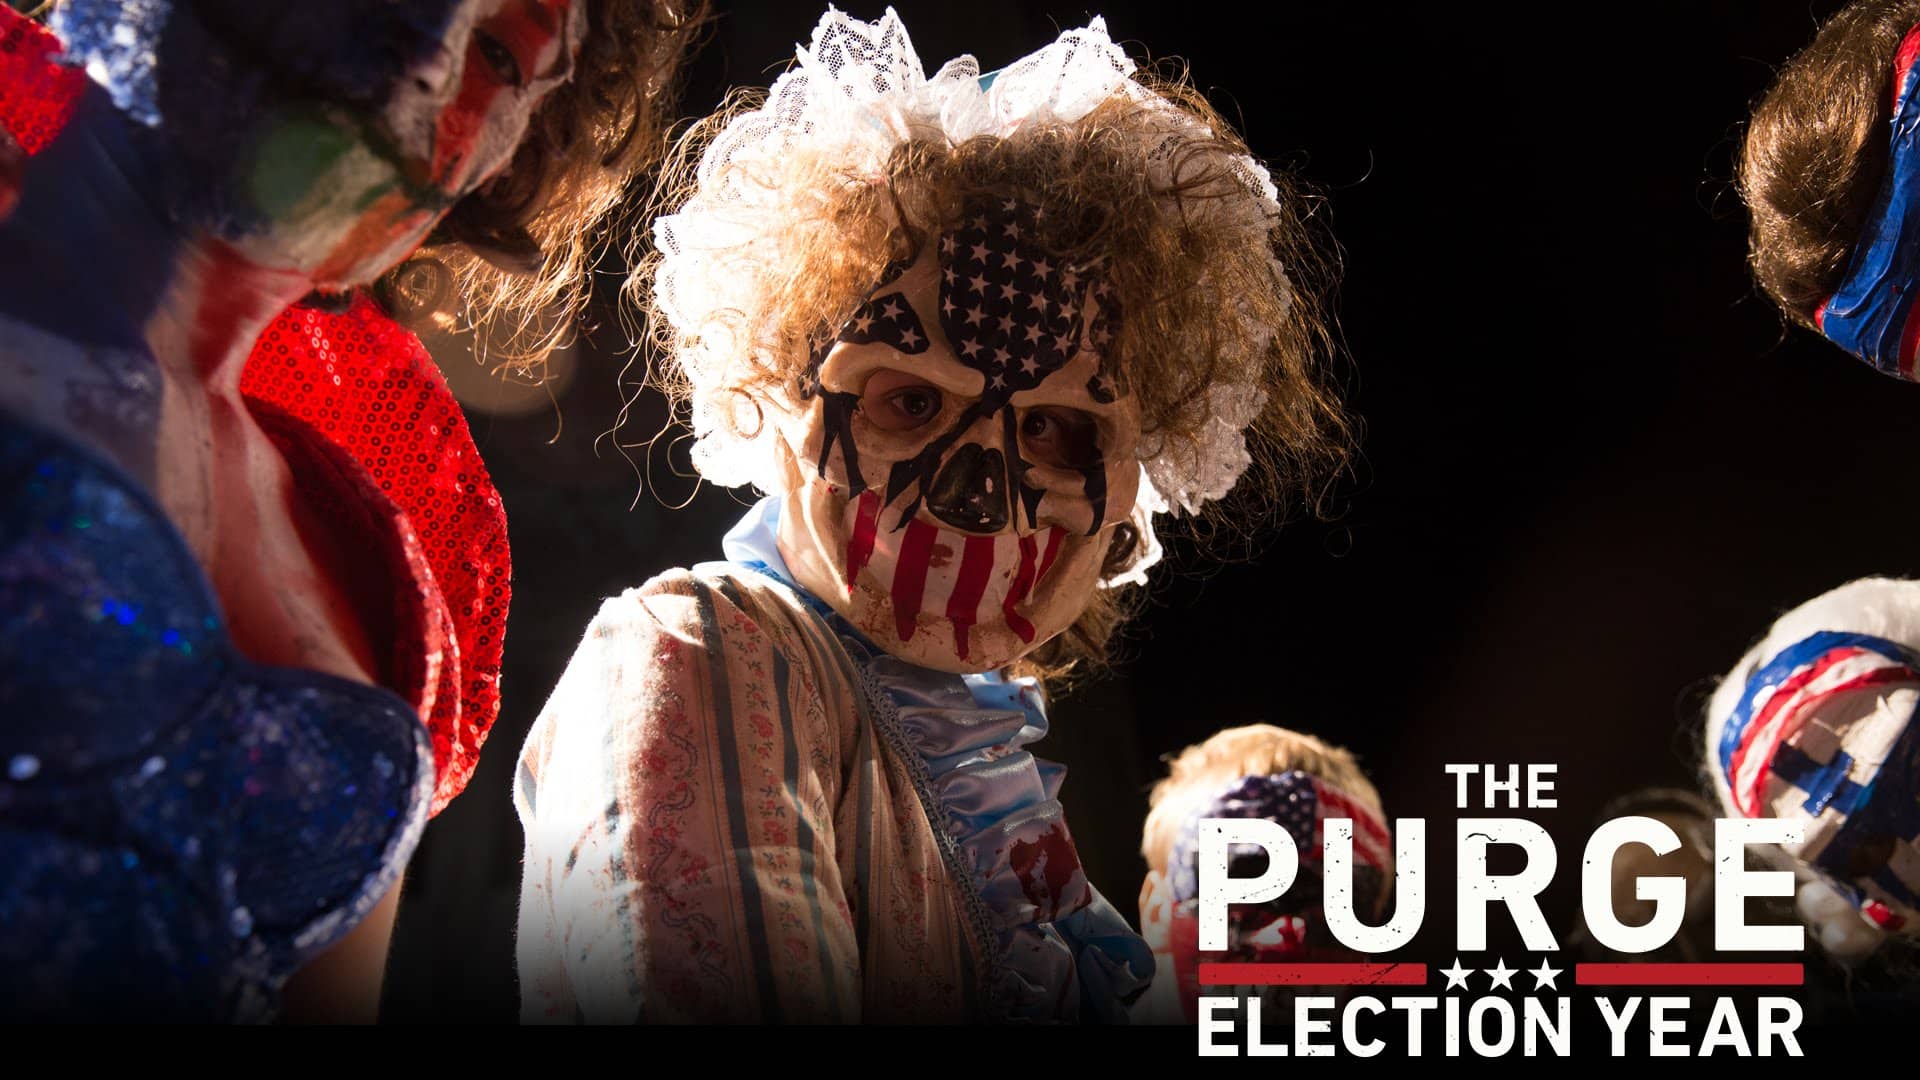 The Purge: Election Year 4K 2016 big poster